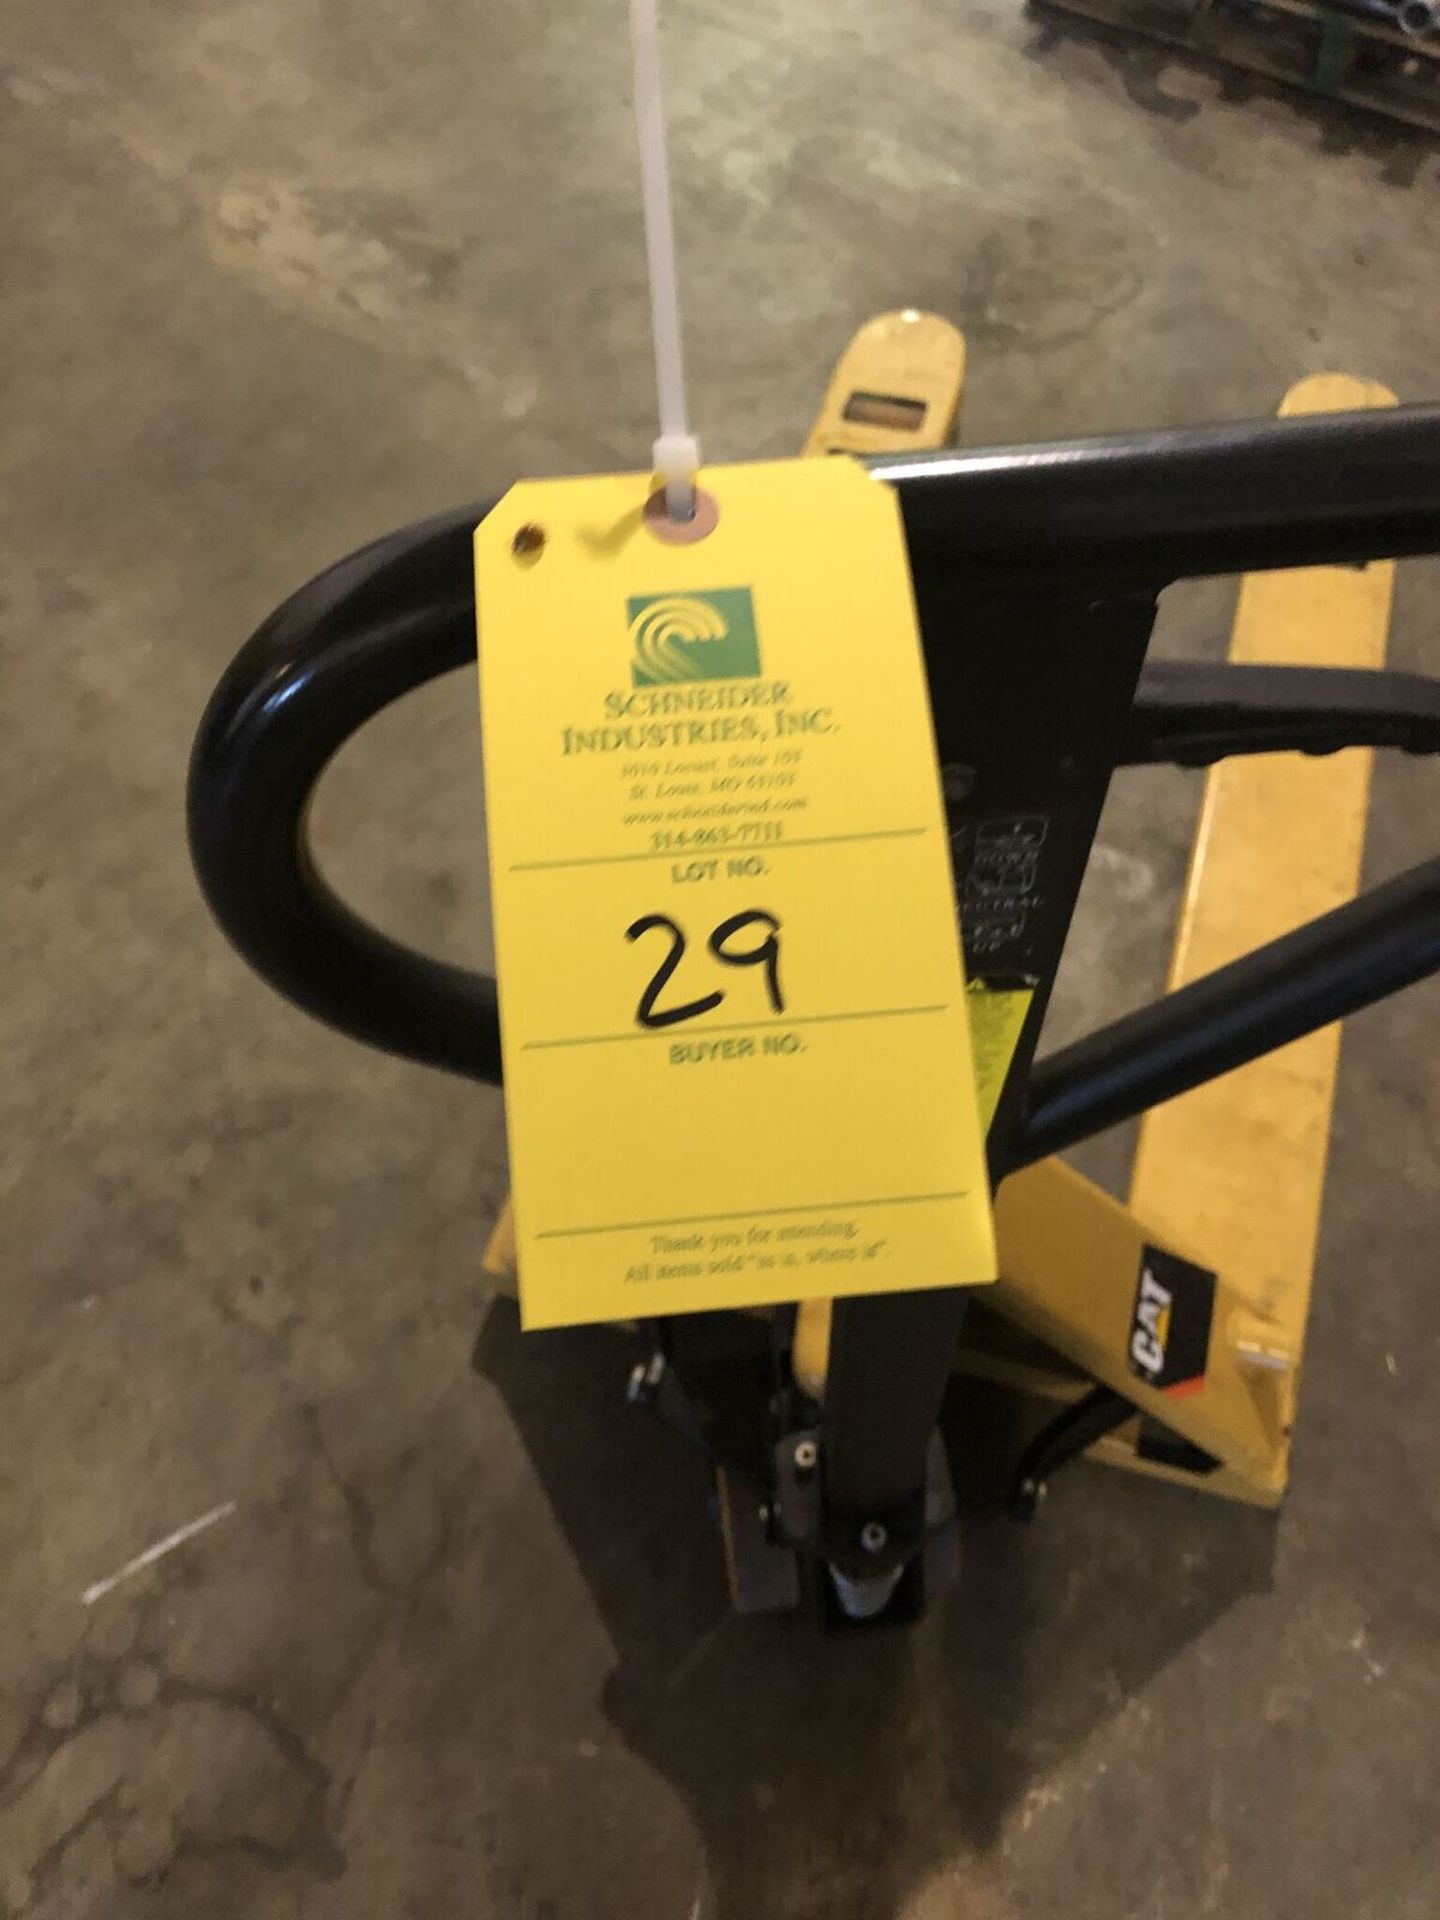 Cat Pallet Jack, 5500 Lbs Capacity, Rigging Price: $15 - Image 2 of 2